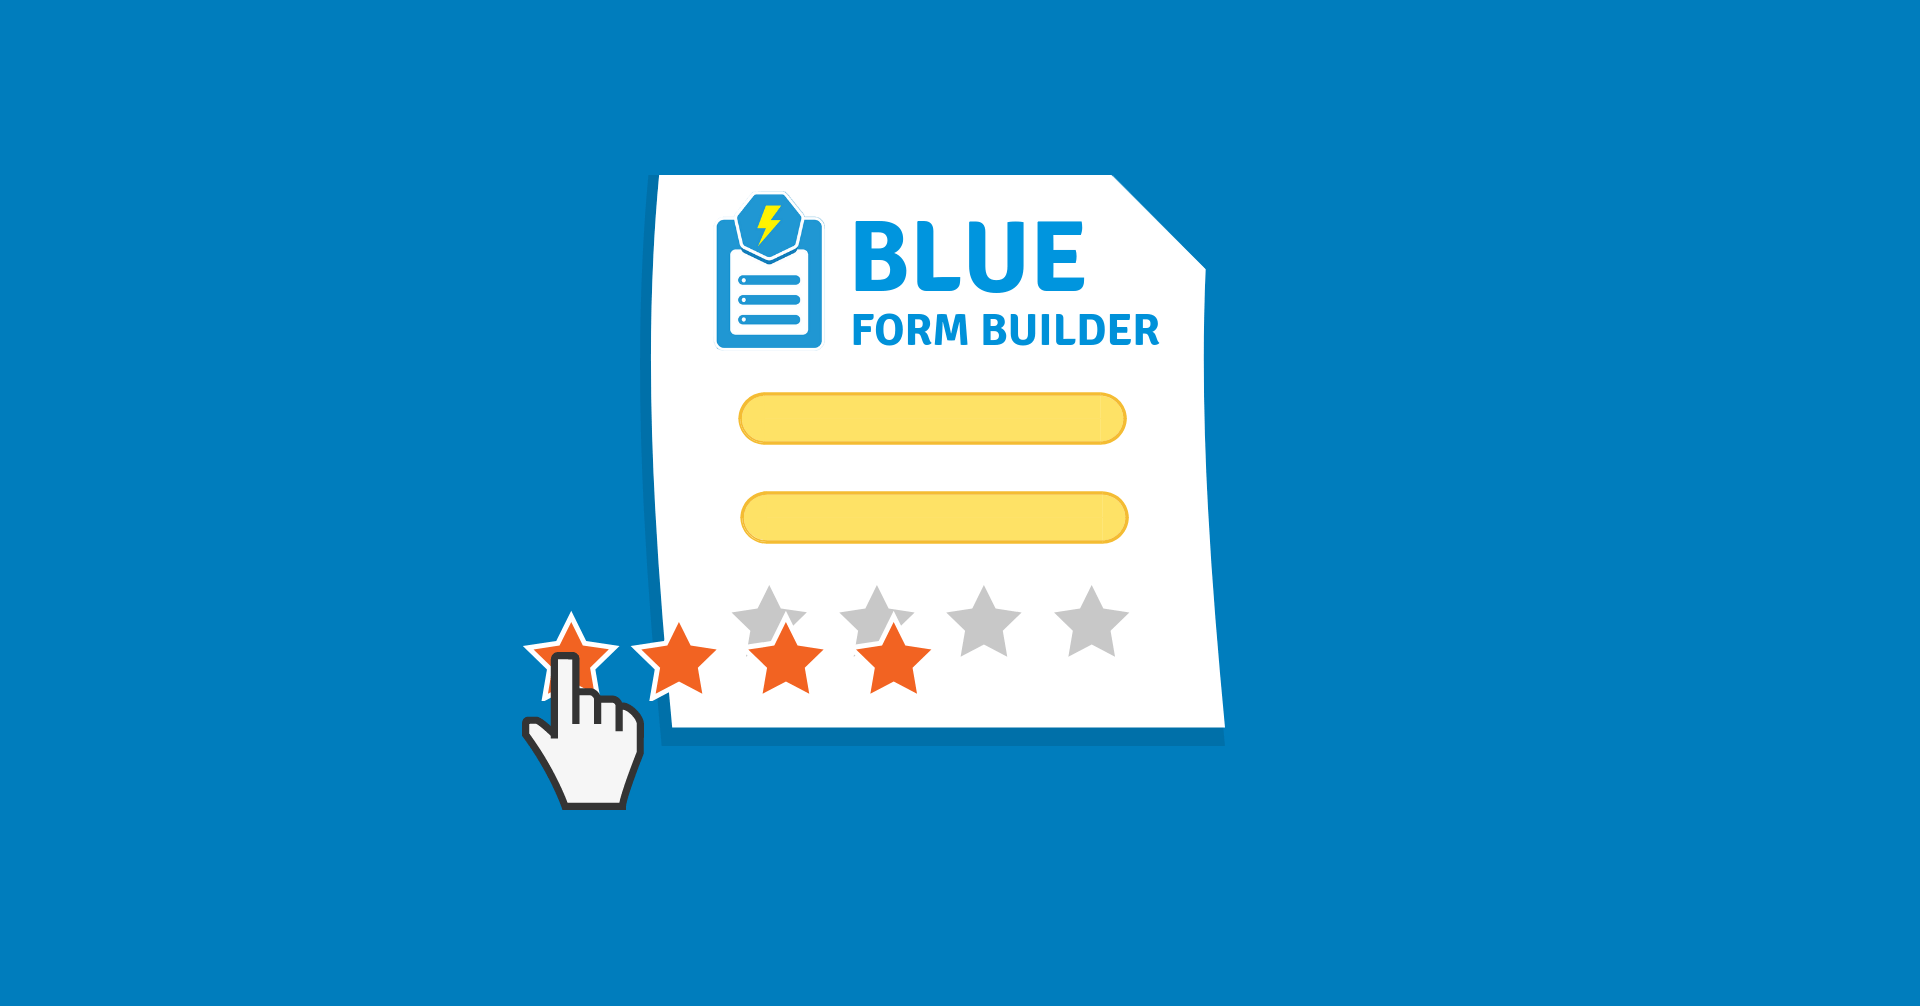 Add user ratings to Magento 2 forms